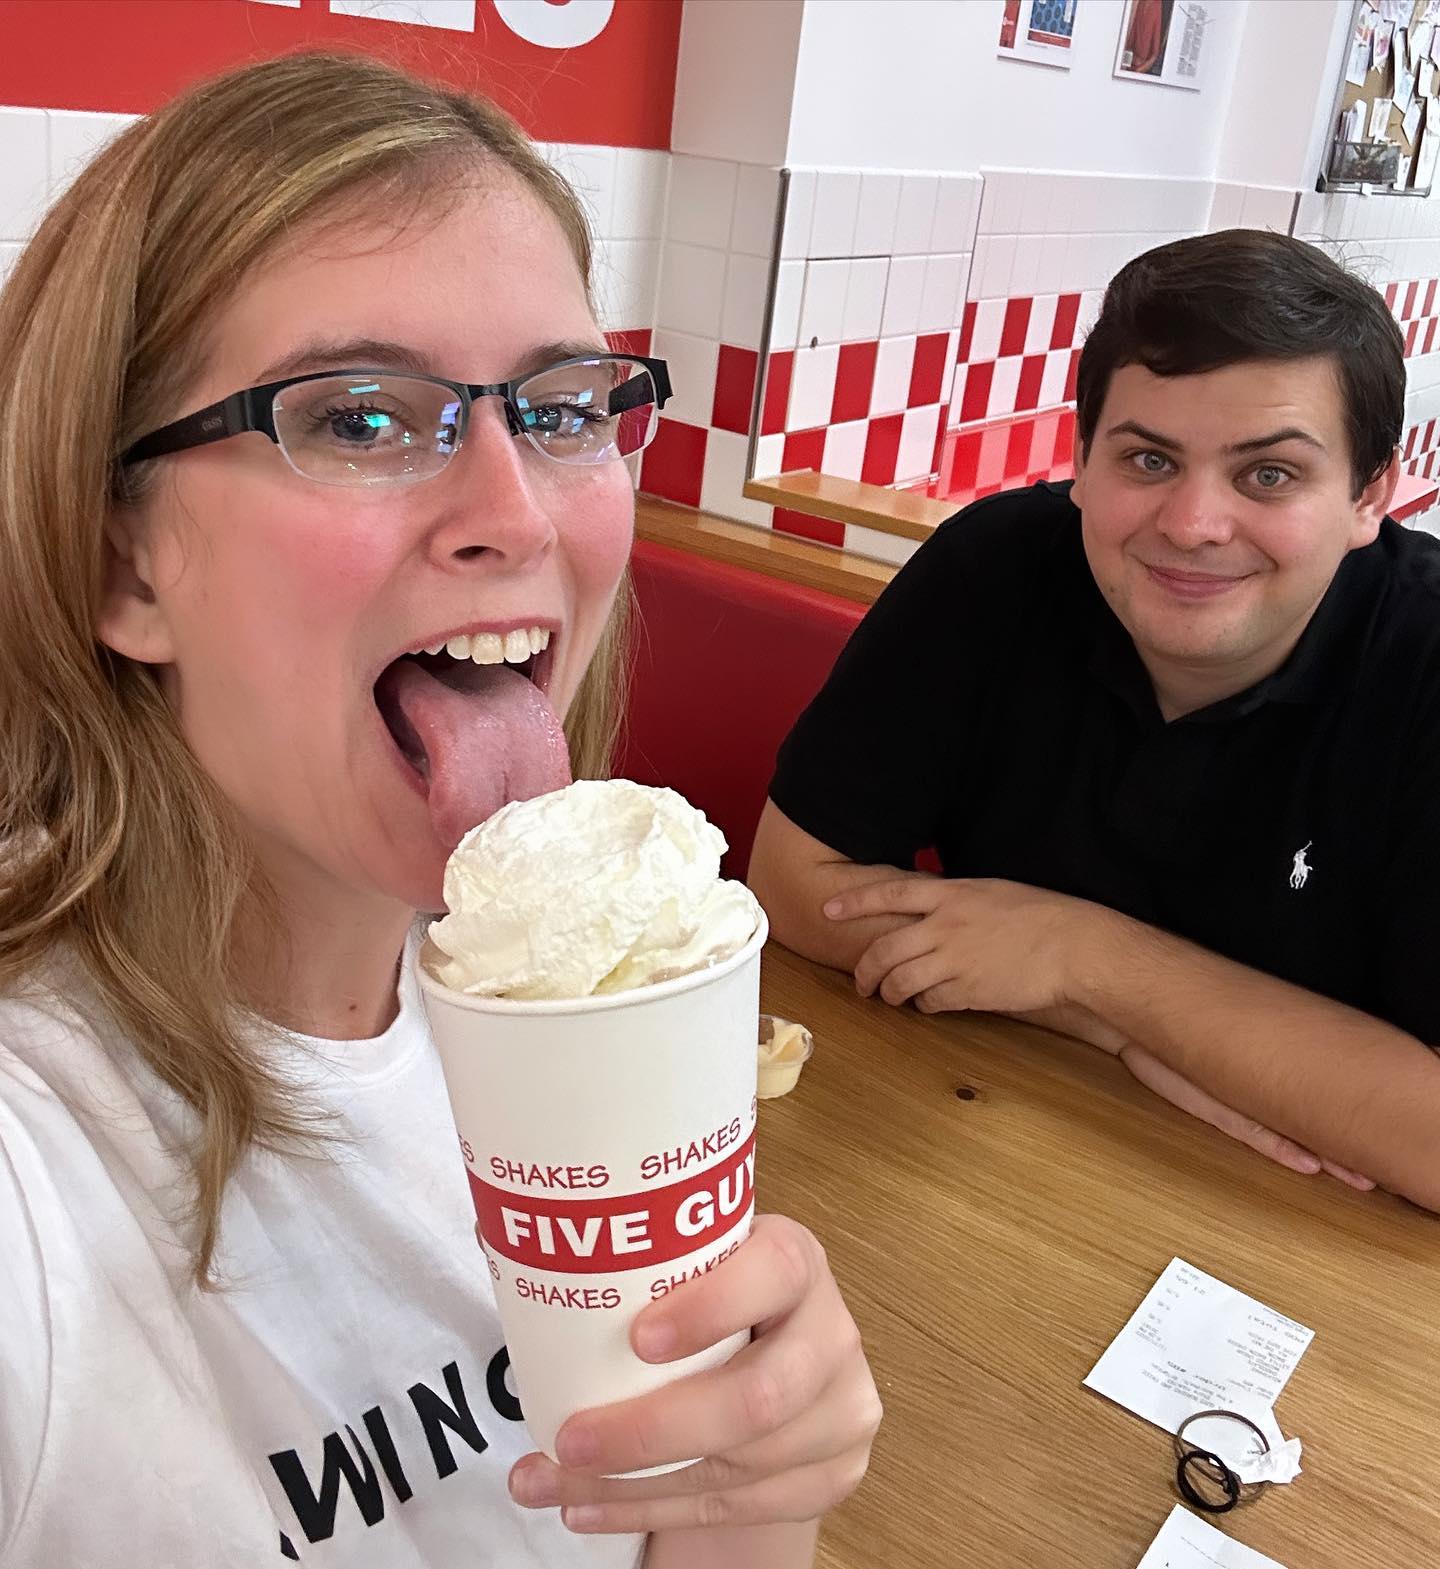 Saturday night post club shenanigans. Many a joke had about having a five guys after having 5 guys (gotta keep it IG friendly so if you want the good stuff you know where to go!)